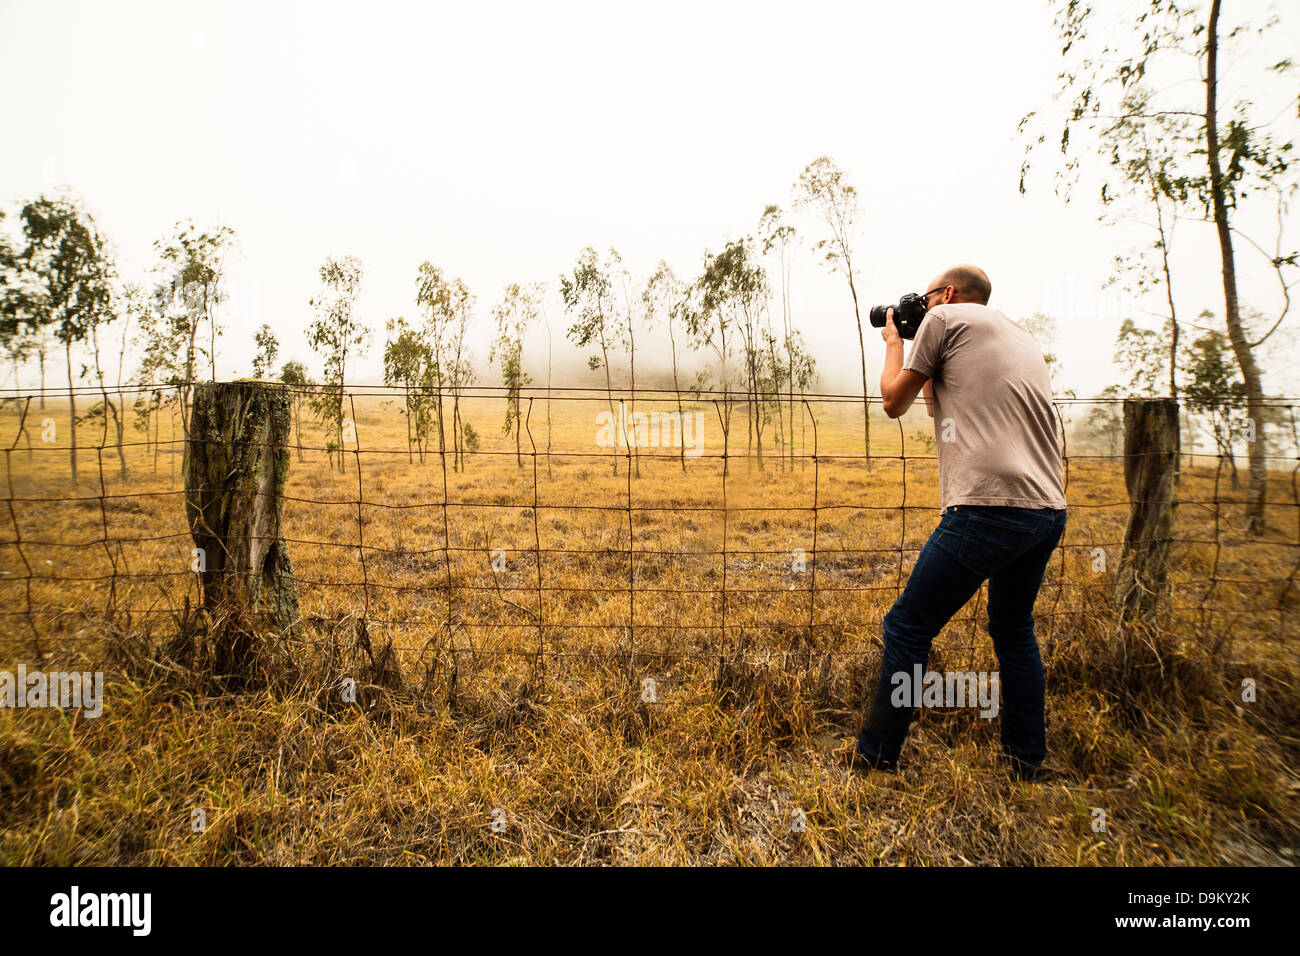 Mid adult man photographing field of saplings Stock Photo